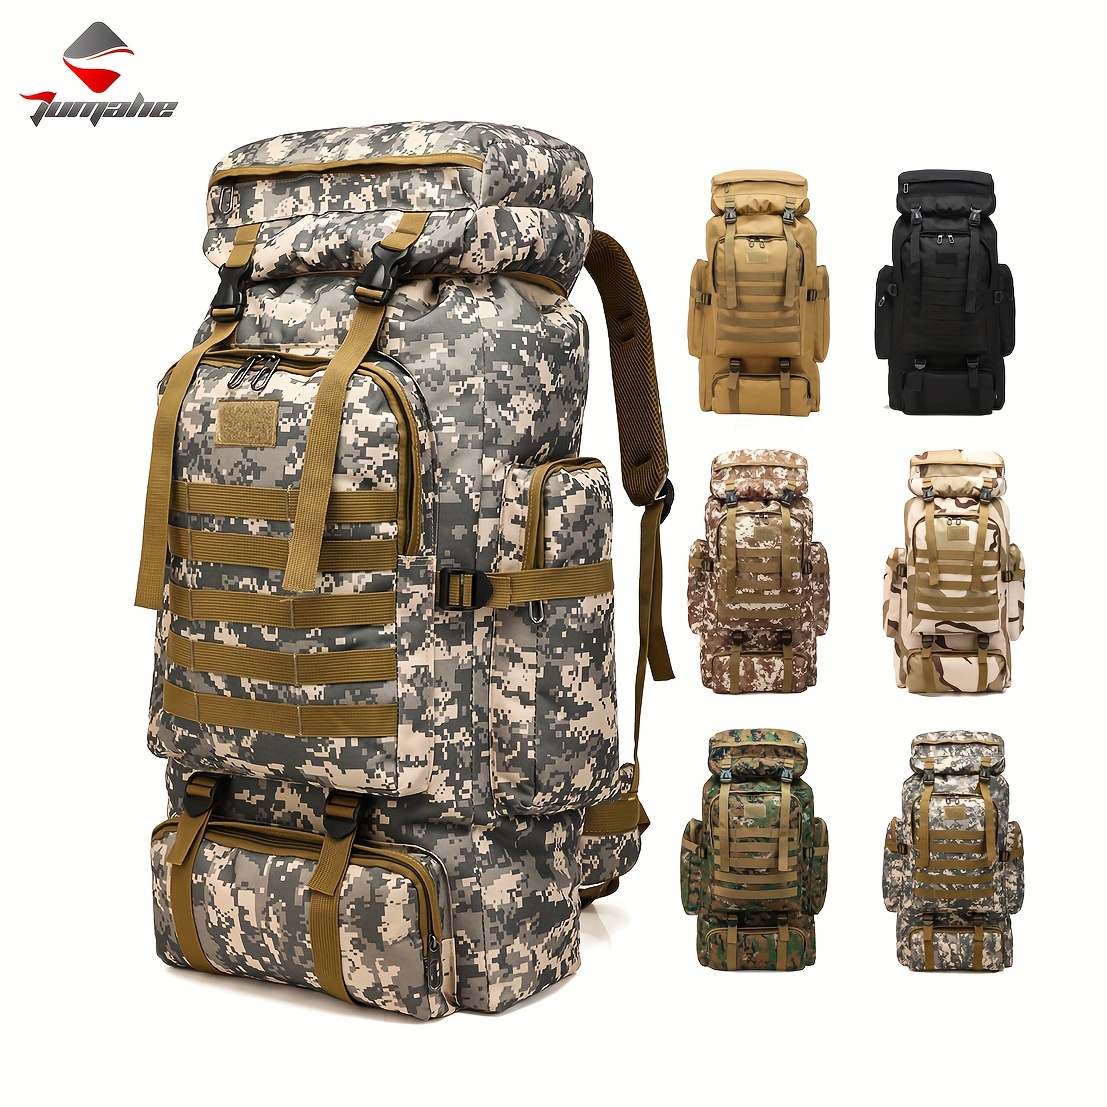 

Tactical Backpack Polyester, Camouflage Large Capacity Sports & Outdoor, Hiking, Mountaineering, Travel Bag With Adjustable Shoulder Straps